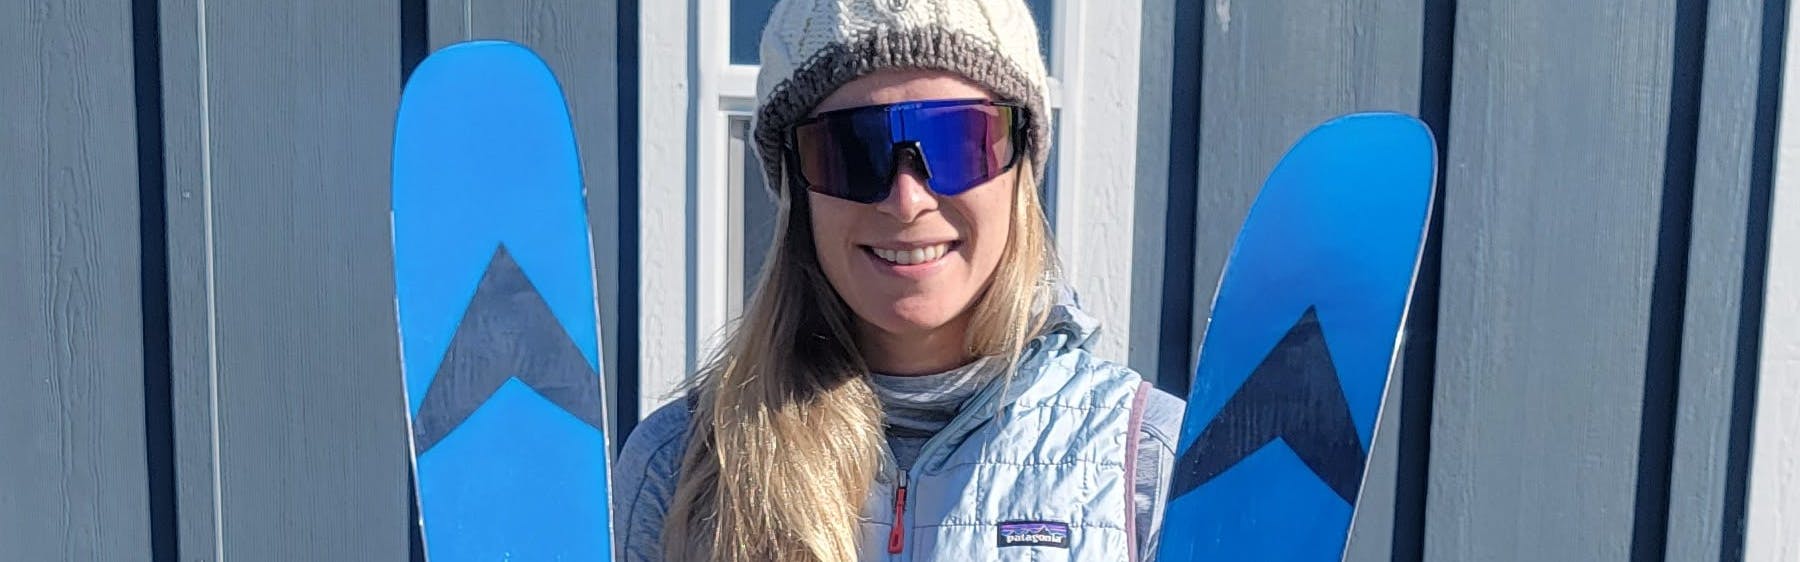 A woman standing smiling while holding the  Dynastar M-Free 99 Skis.